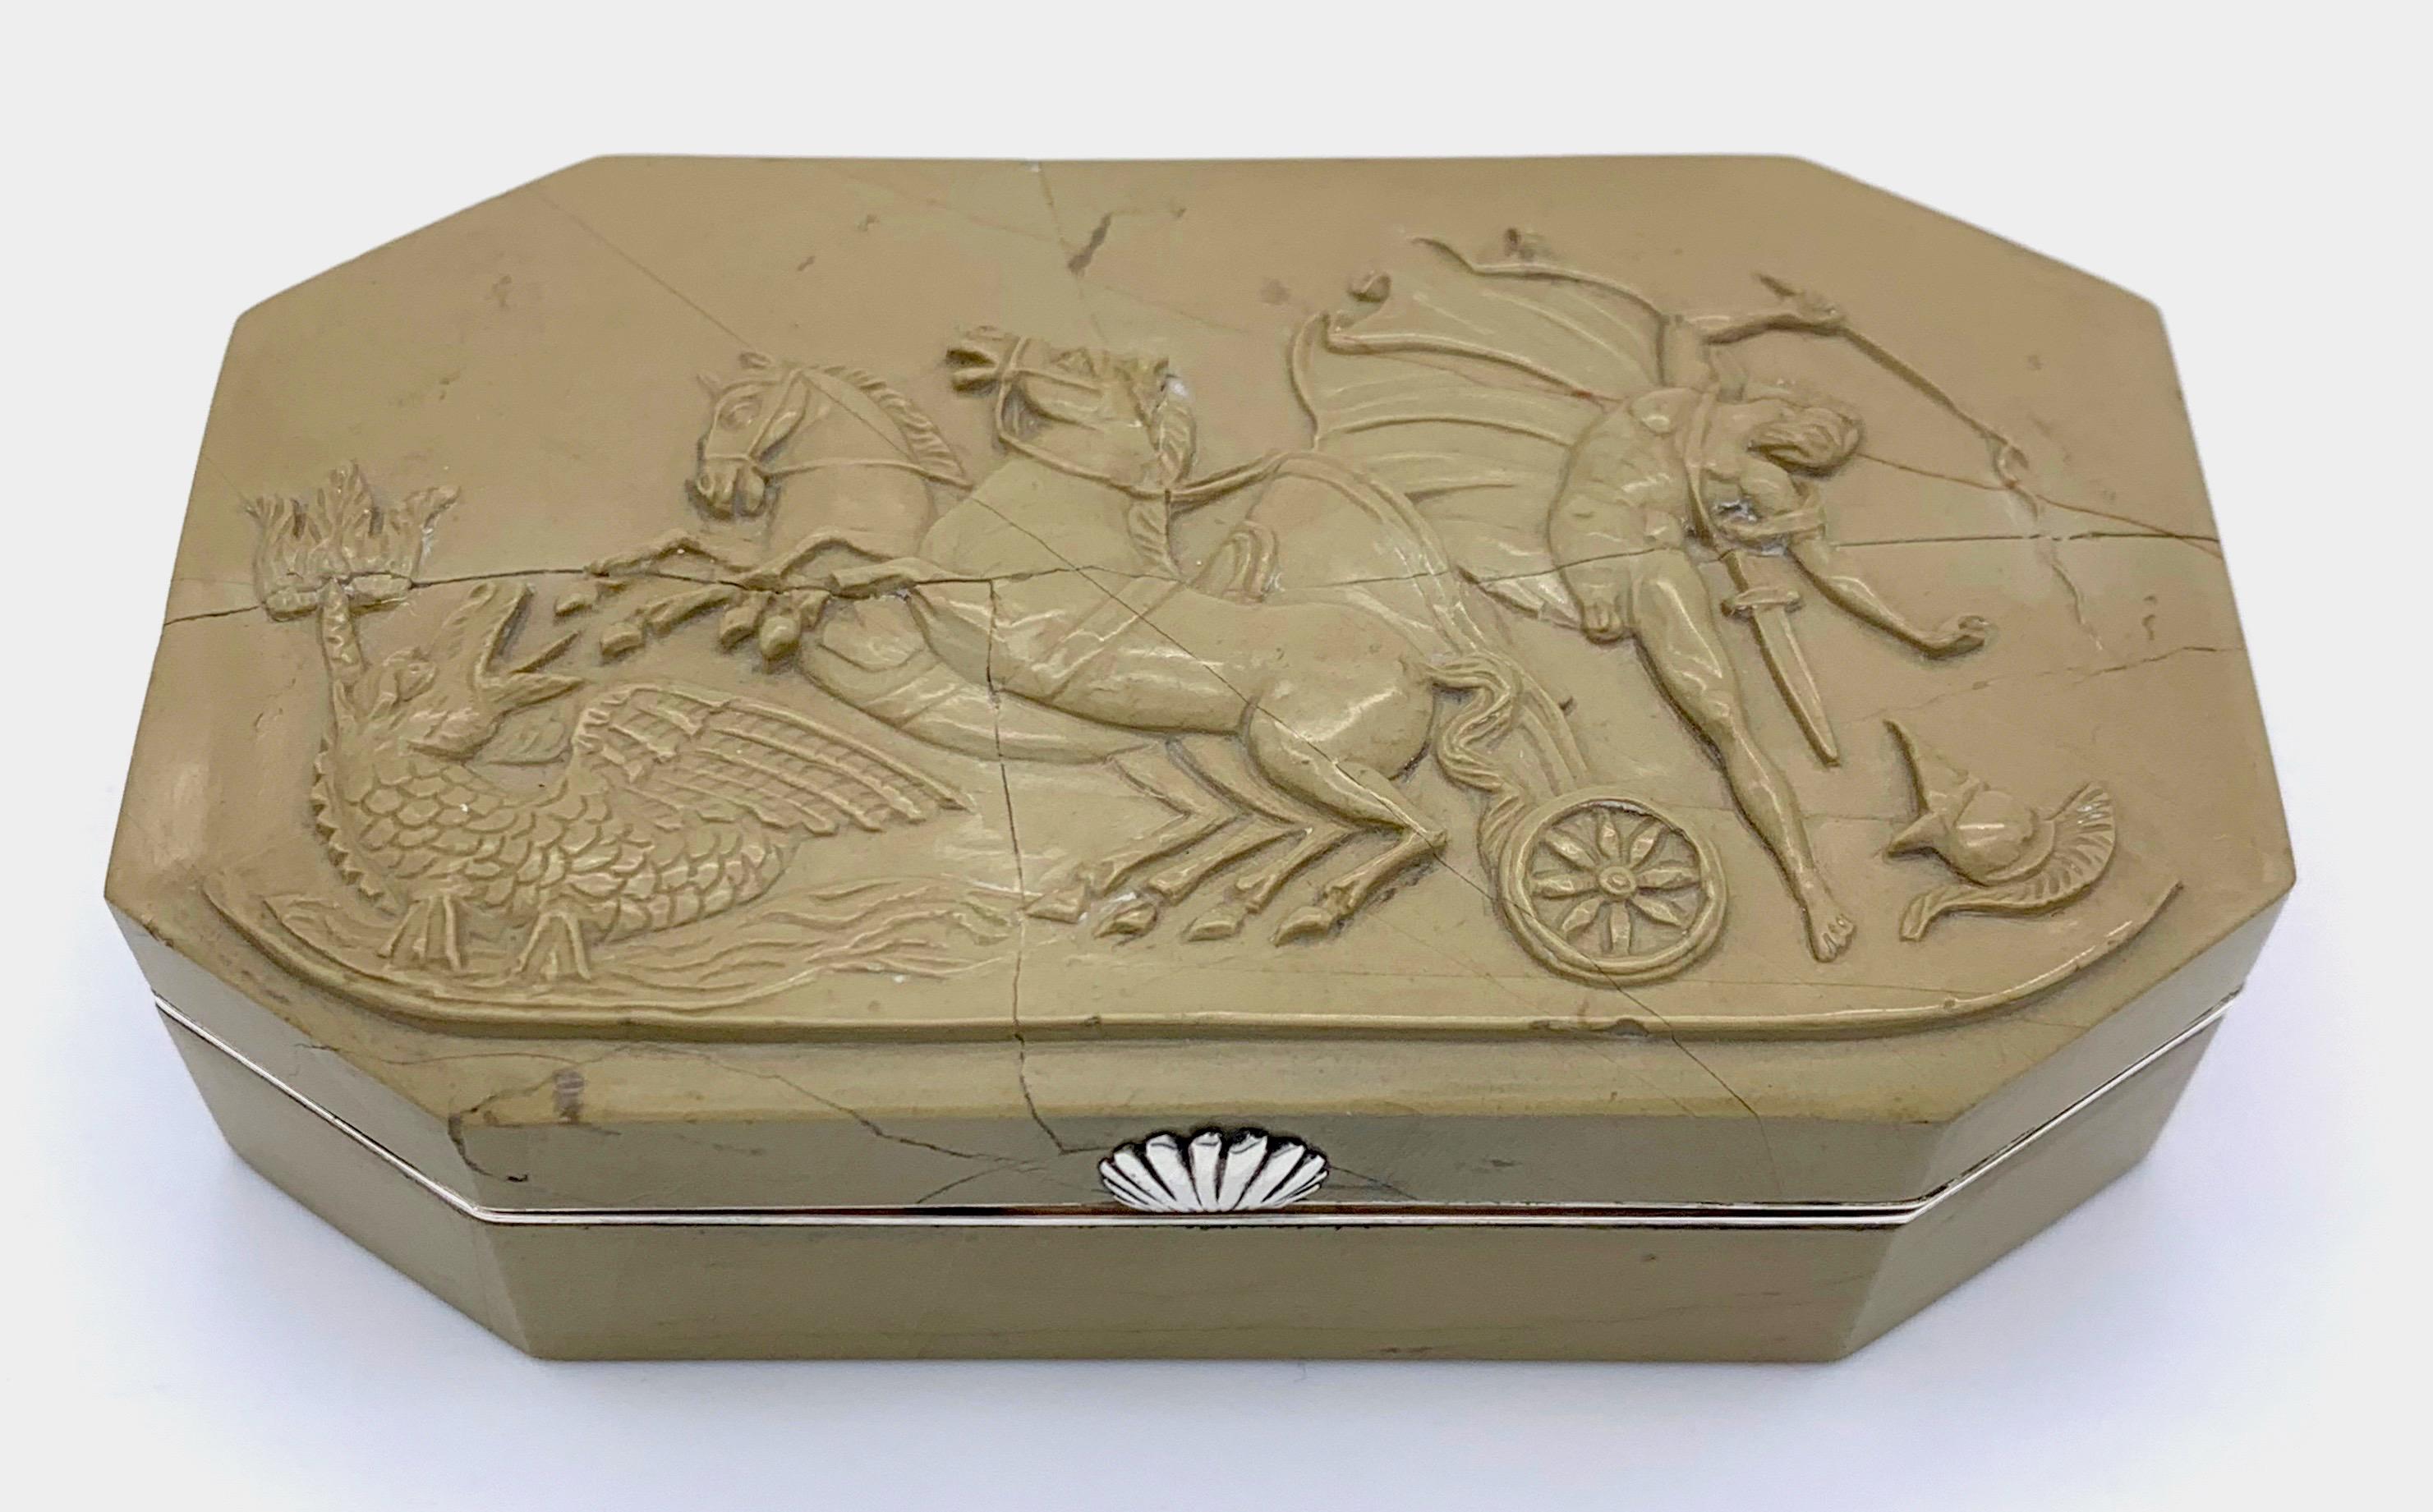 An antique warrior suffers the punishment of Poseidon, who sends a sea monster to frighten the two horses of the young man's chariot.  
Exquisite snuffbox with a fine soapstone carving mounted in a solid silver frame. 
The handsome snuffbox was